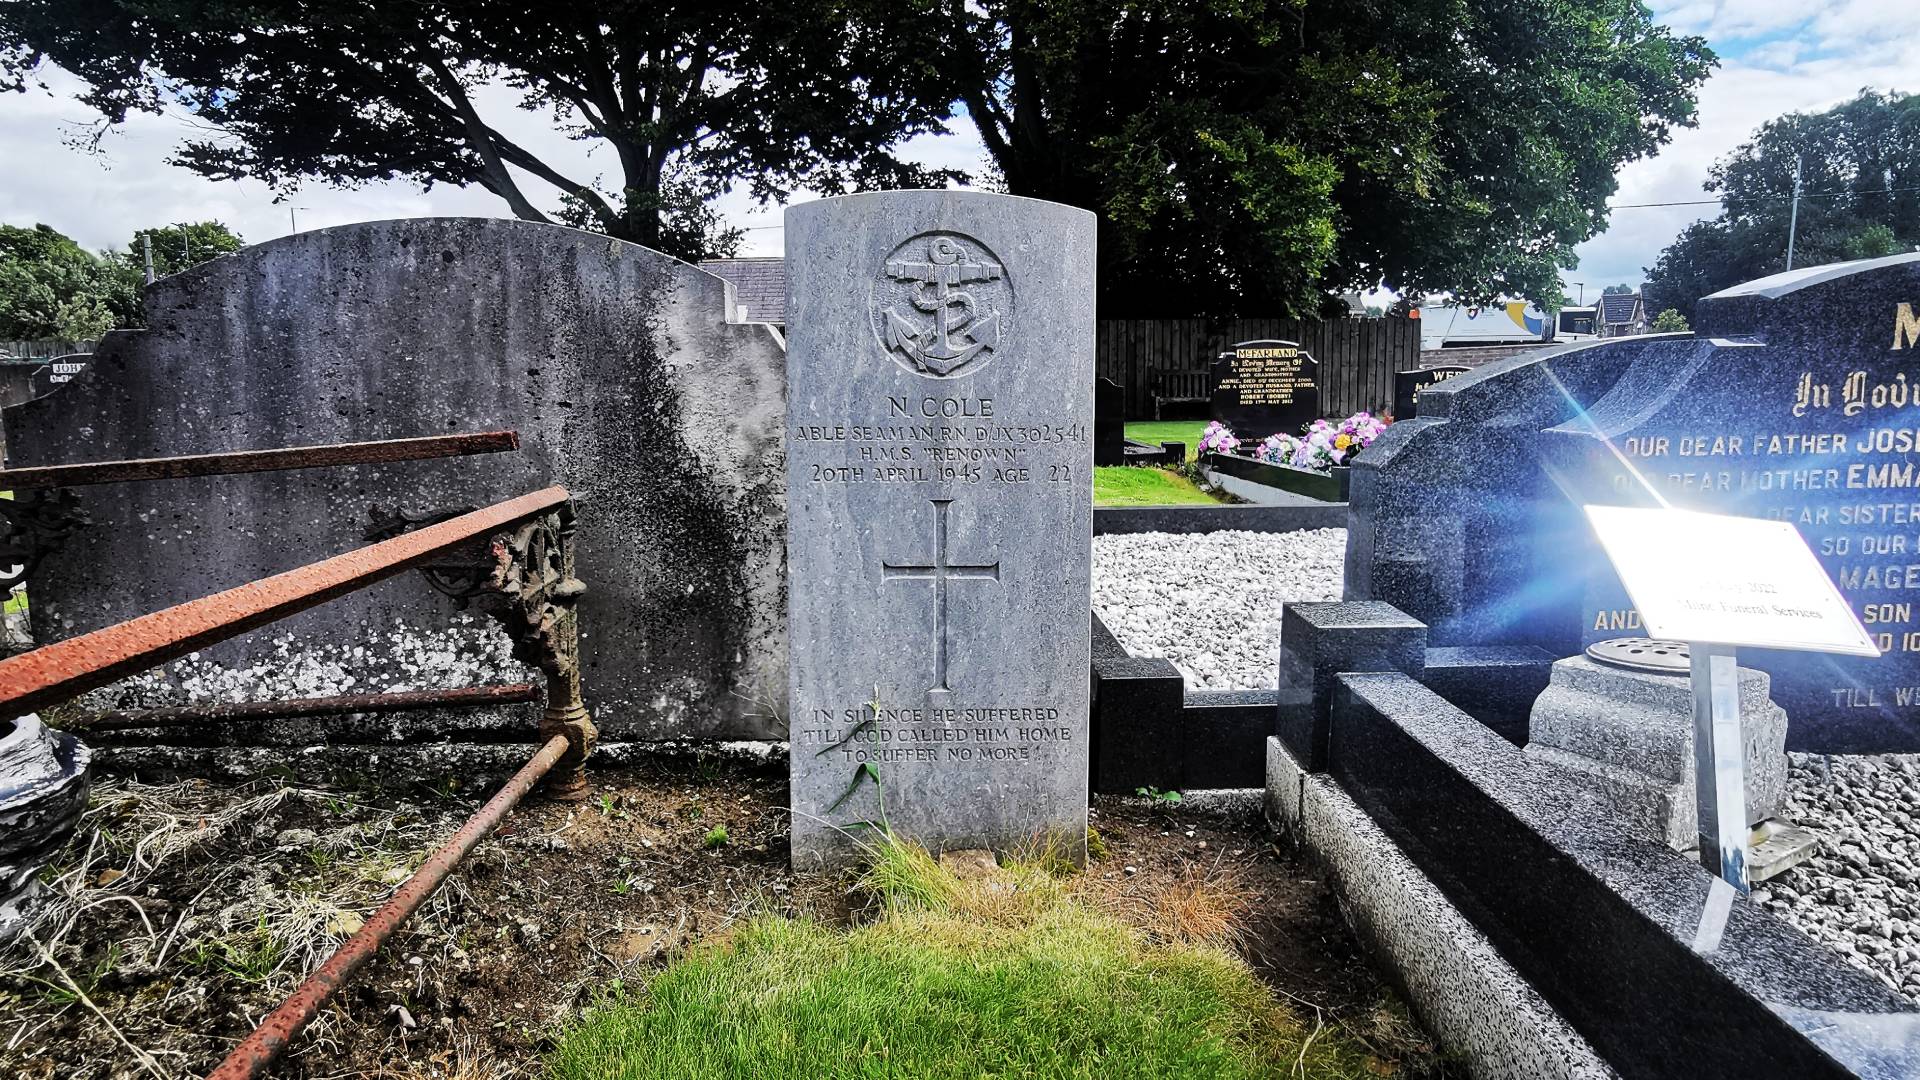 A Commonwealth War Graves headstone marks the grave of Able Seaman Norman Cole in Seagoe Cemetery, Portadown, Co. Armagh.